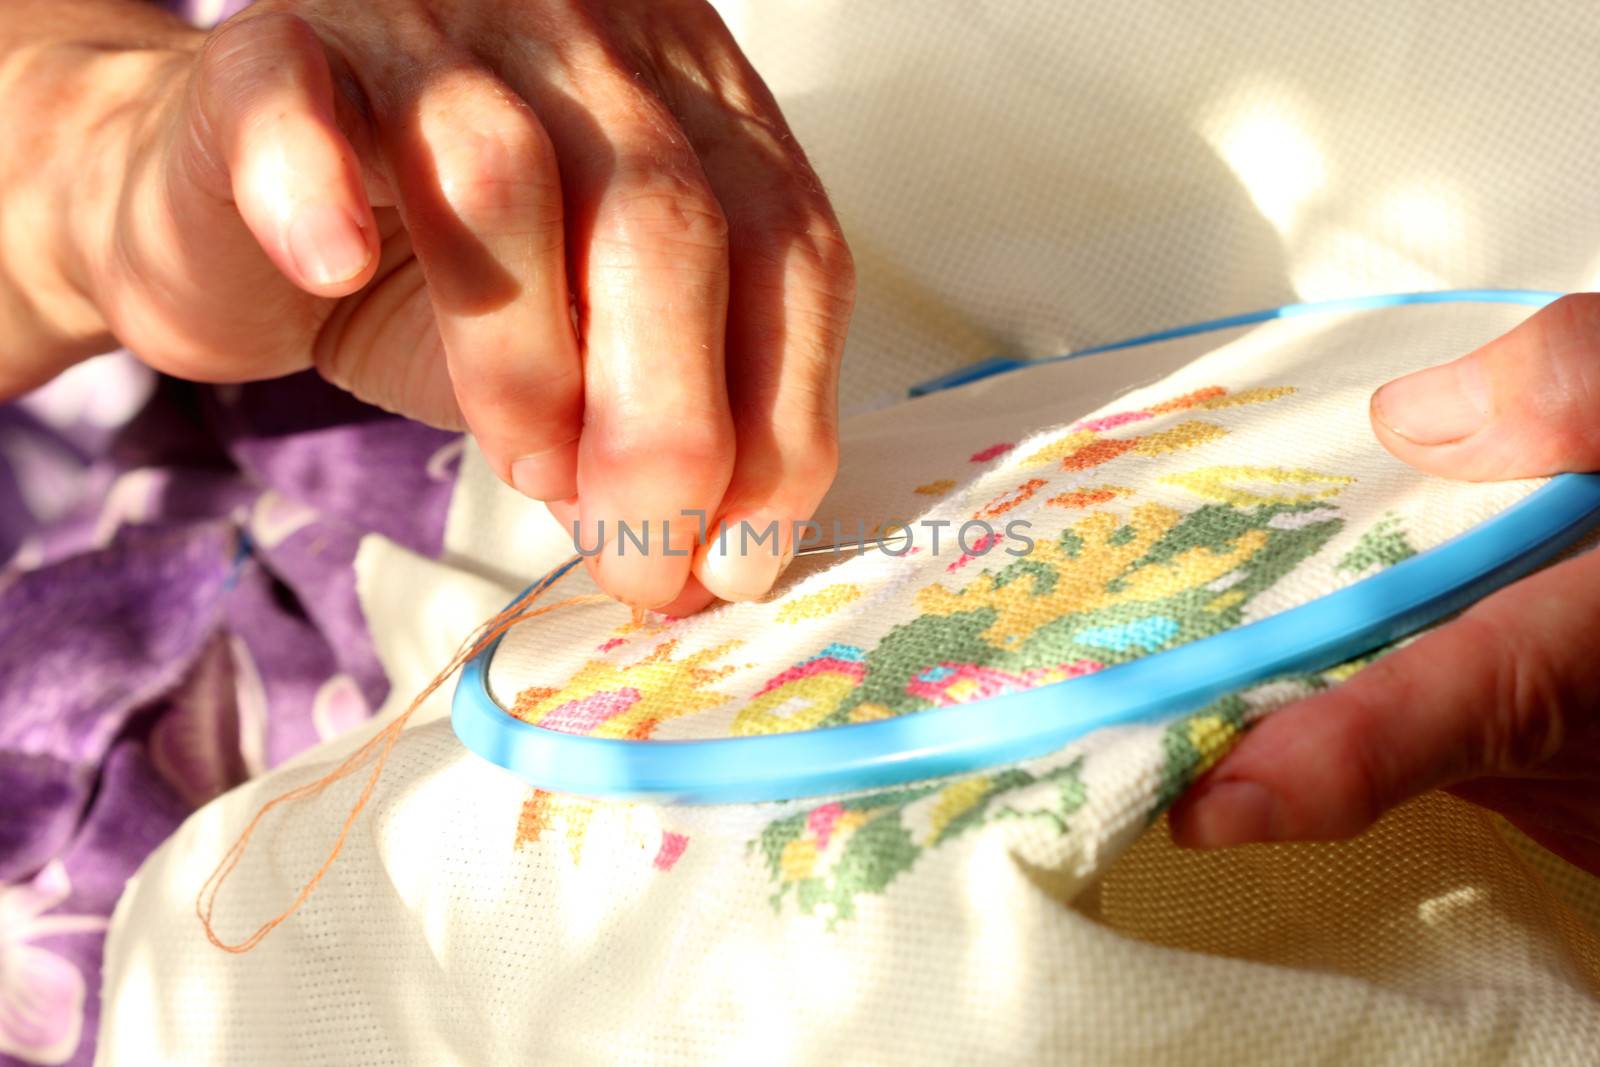 Hands of an old woman busy embroidering